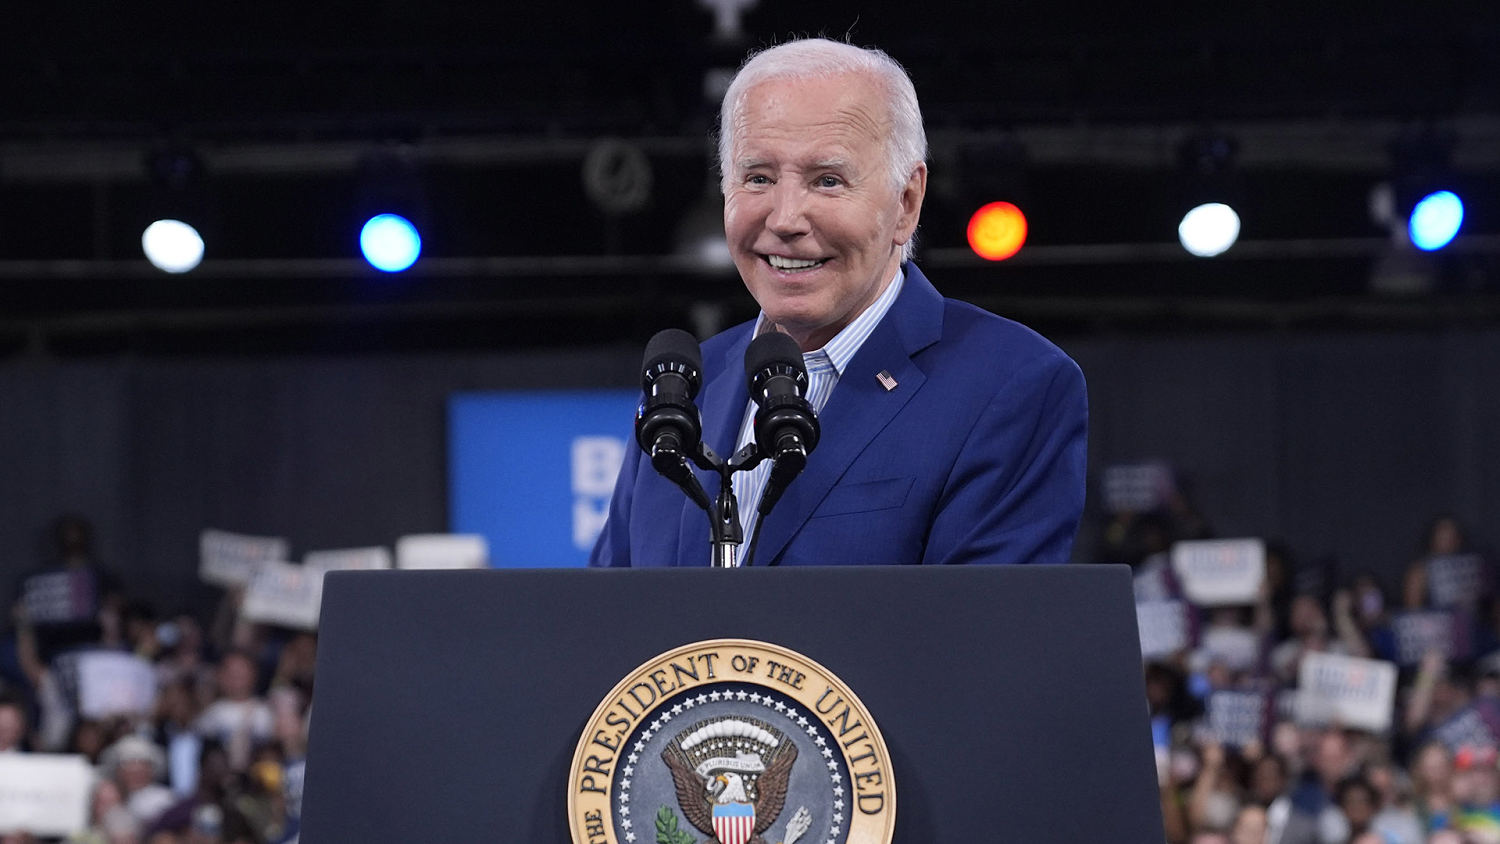 Biden holds campaign rally in Wisconsin